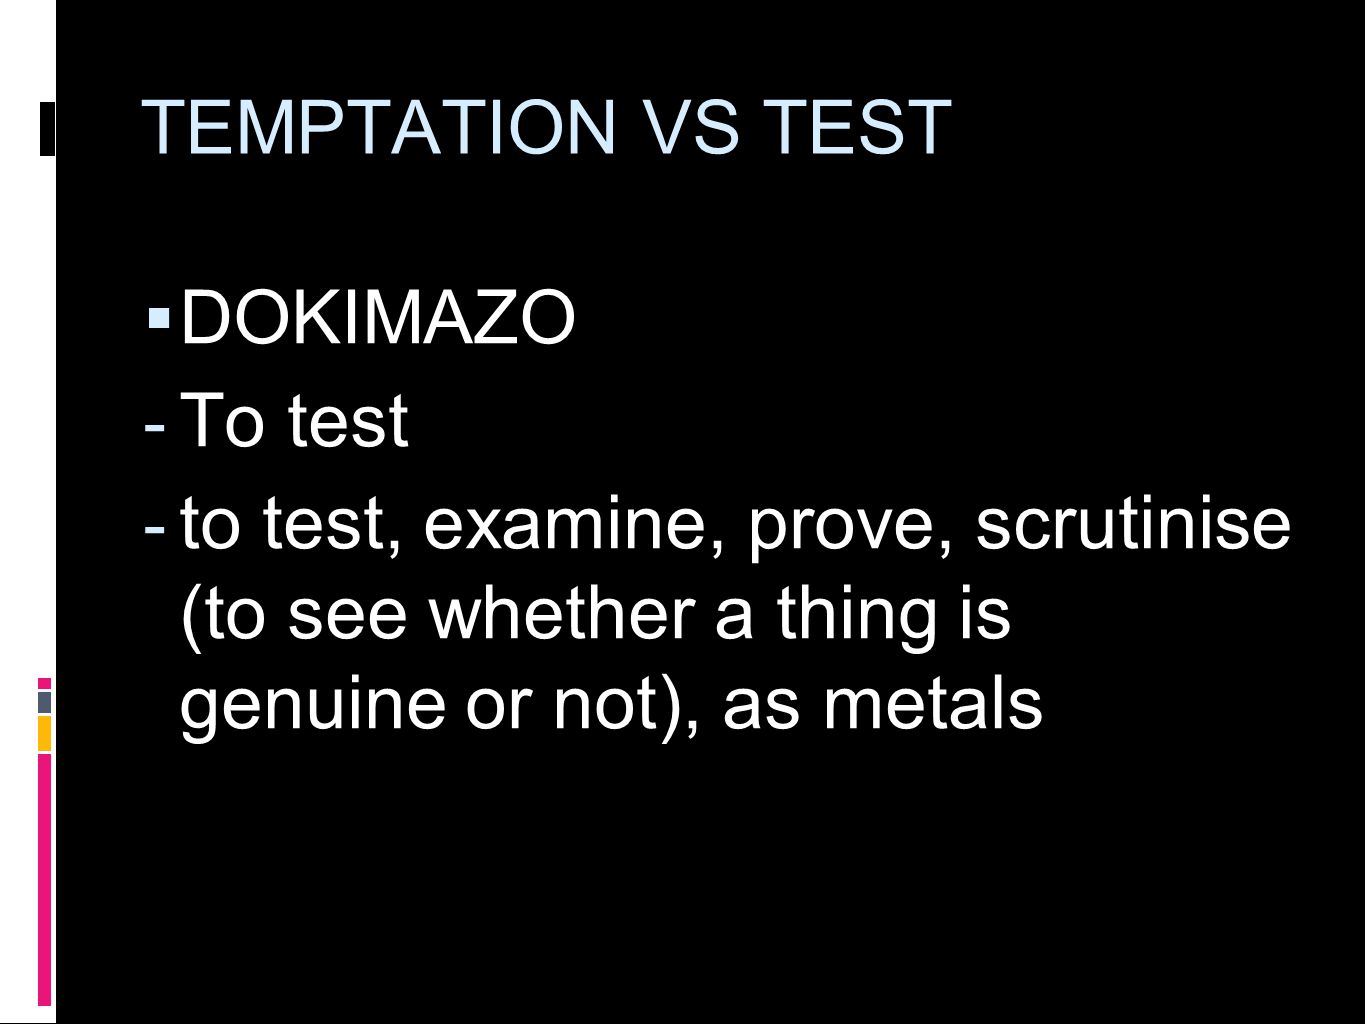 TEMPTATION VS TEST  DOKIMAZO  To test  to test, examine, prove, scrutinise (to see whether a thing is genuine or not), as metals